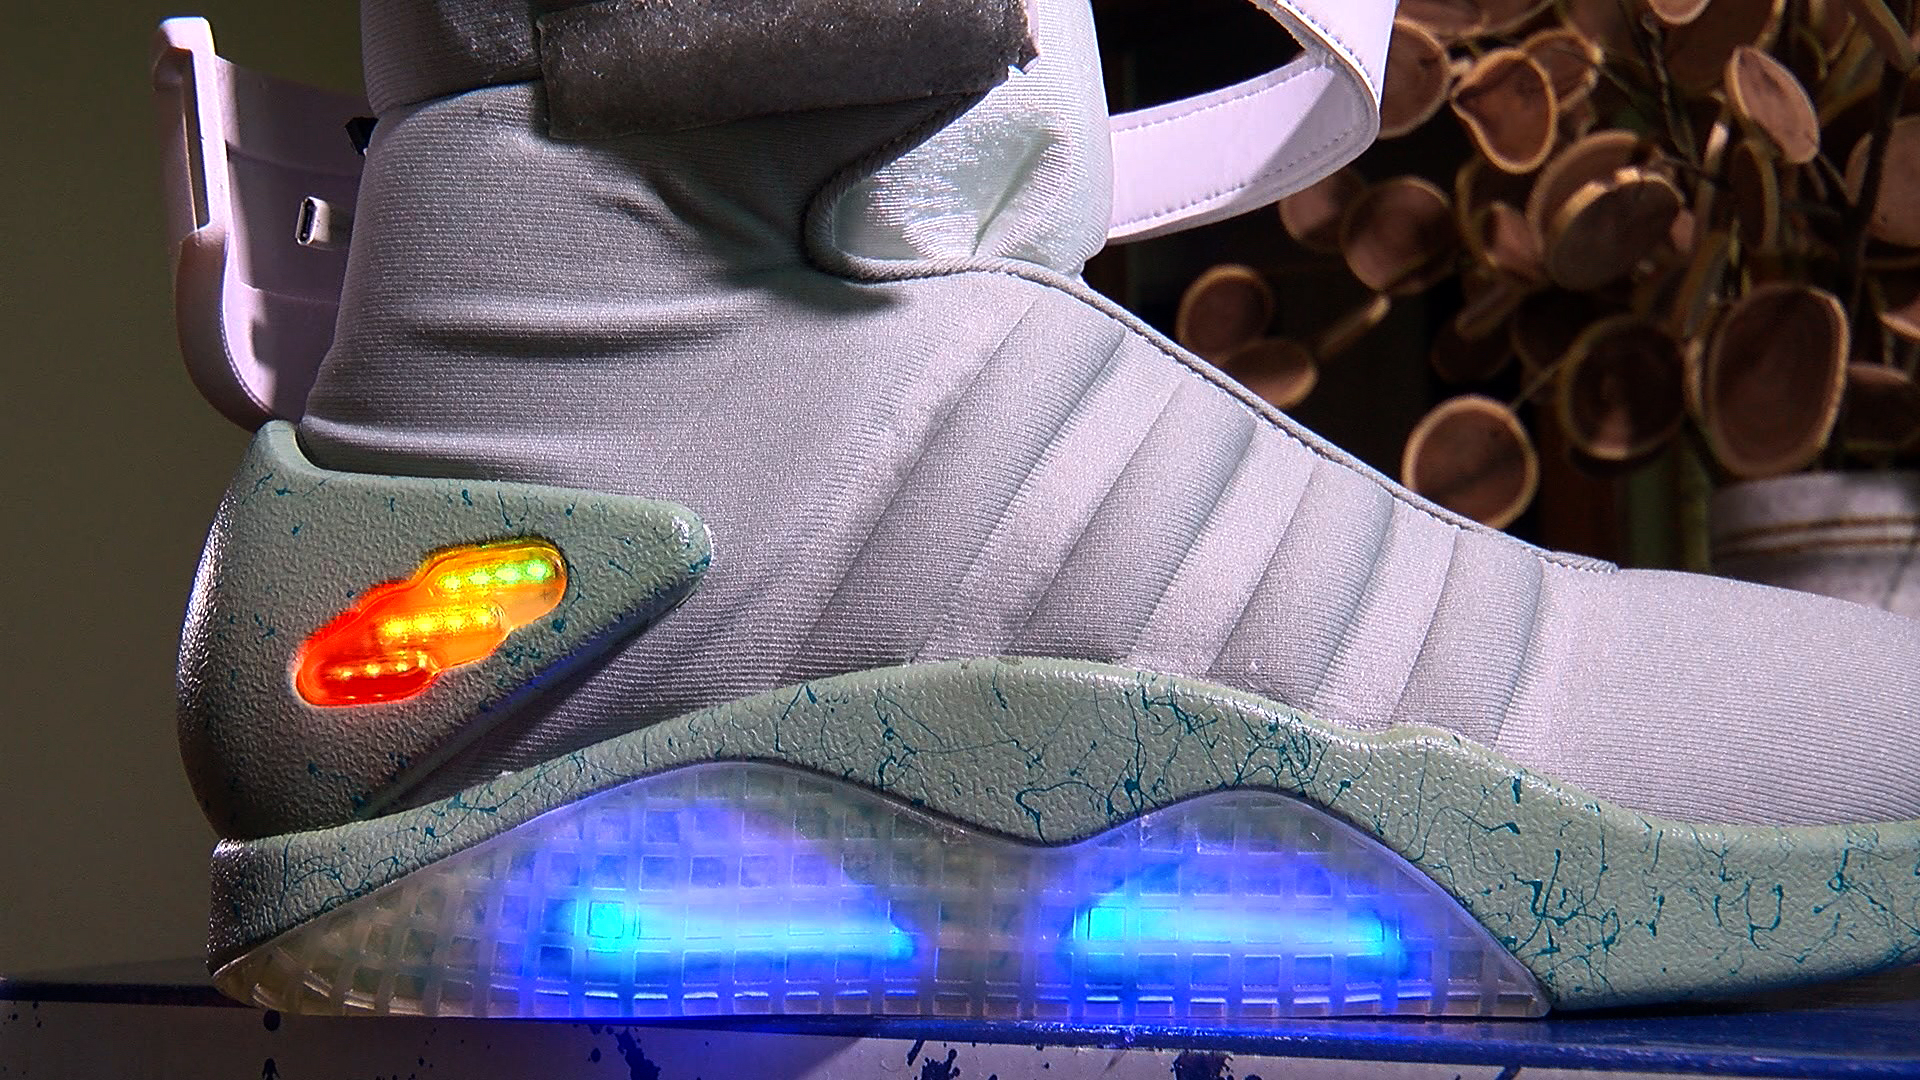 nike back to the future sneakers